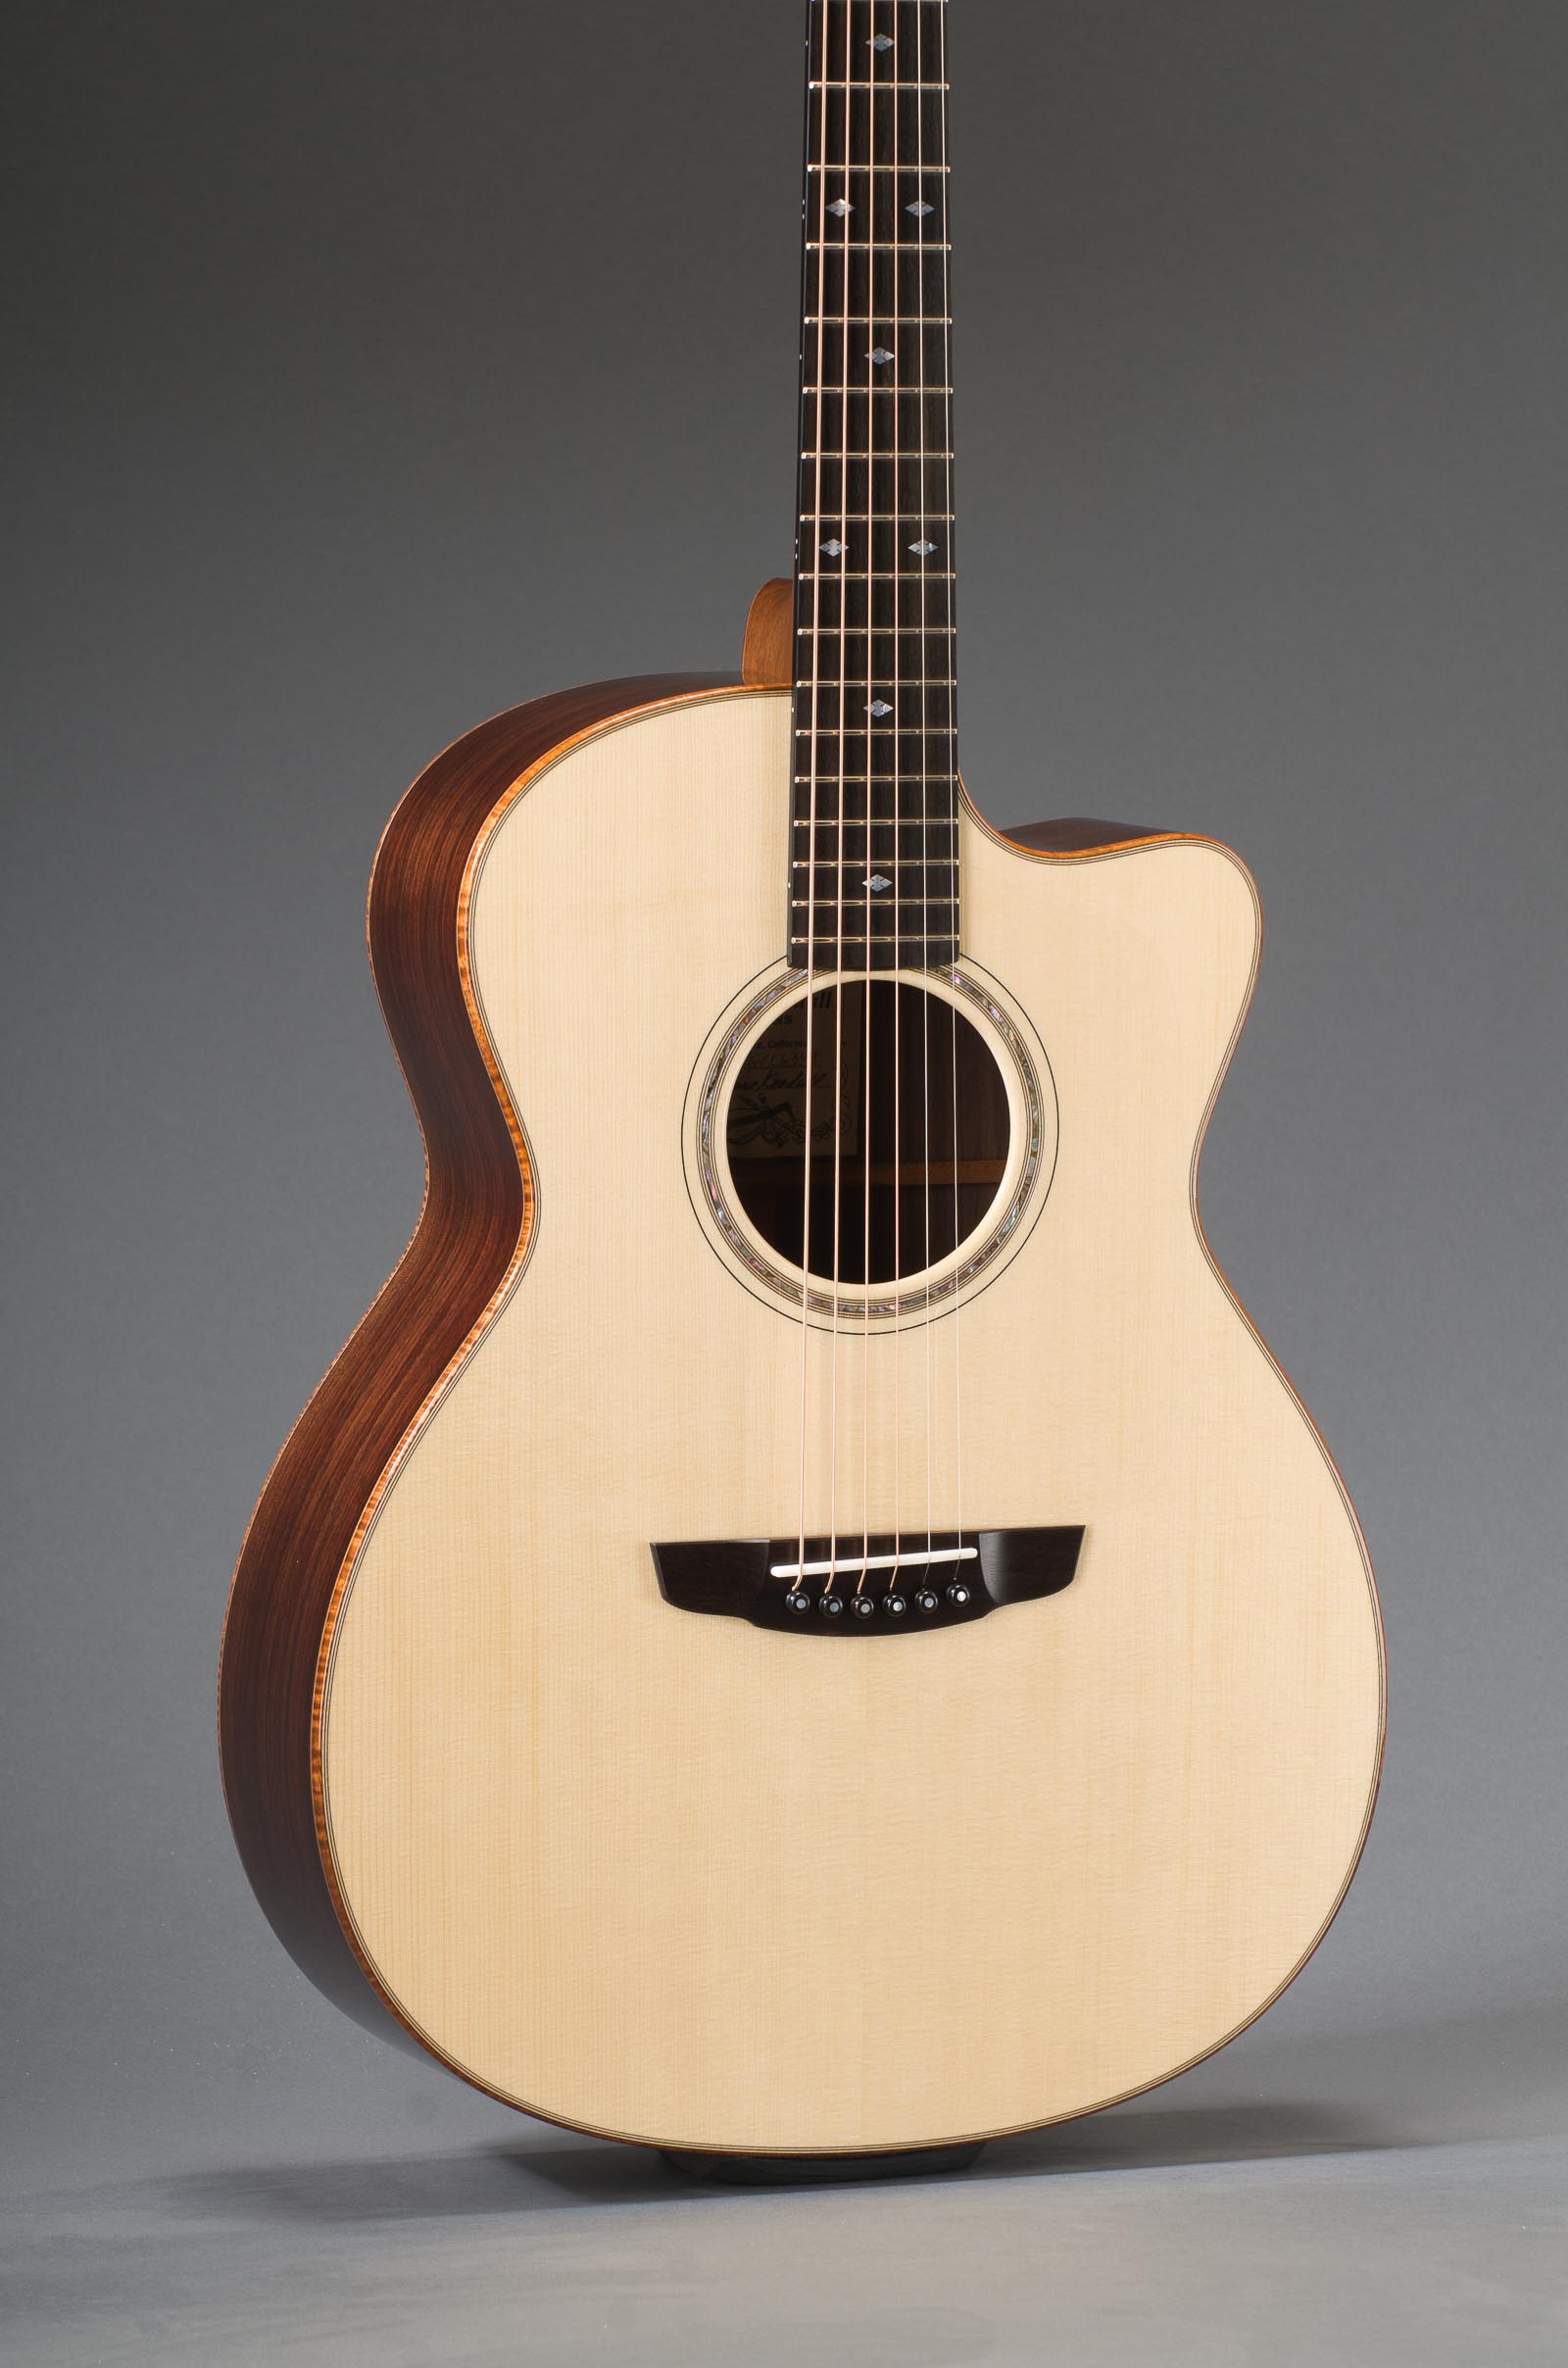 Signature East Indian Rosewood Grand Concert With Engelmann Spruce Top, Curly Koa Binding And Venetian Cutaway